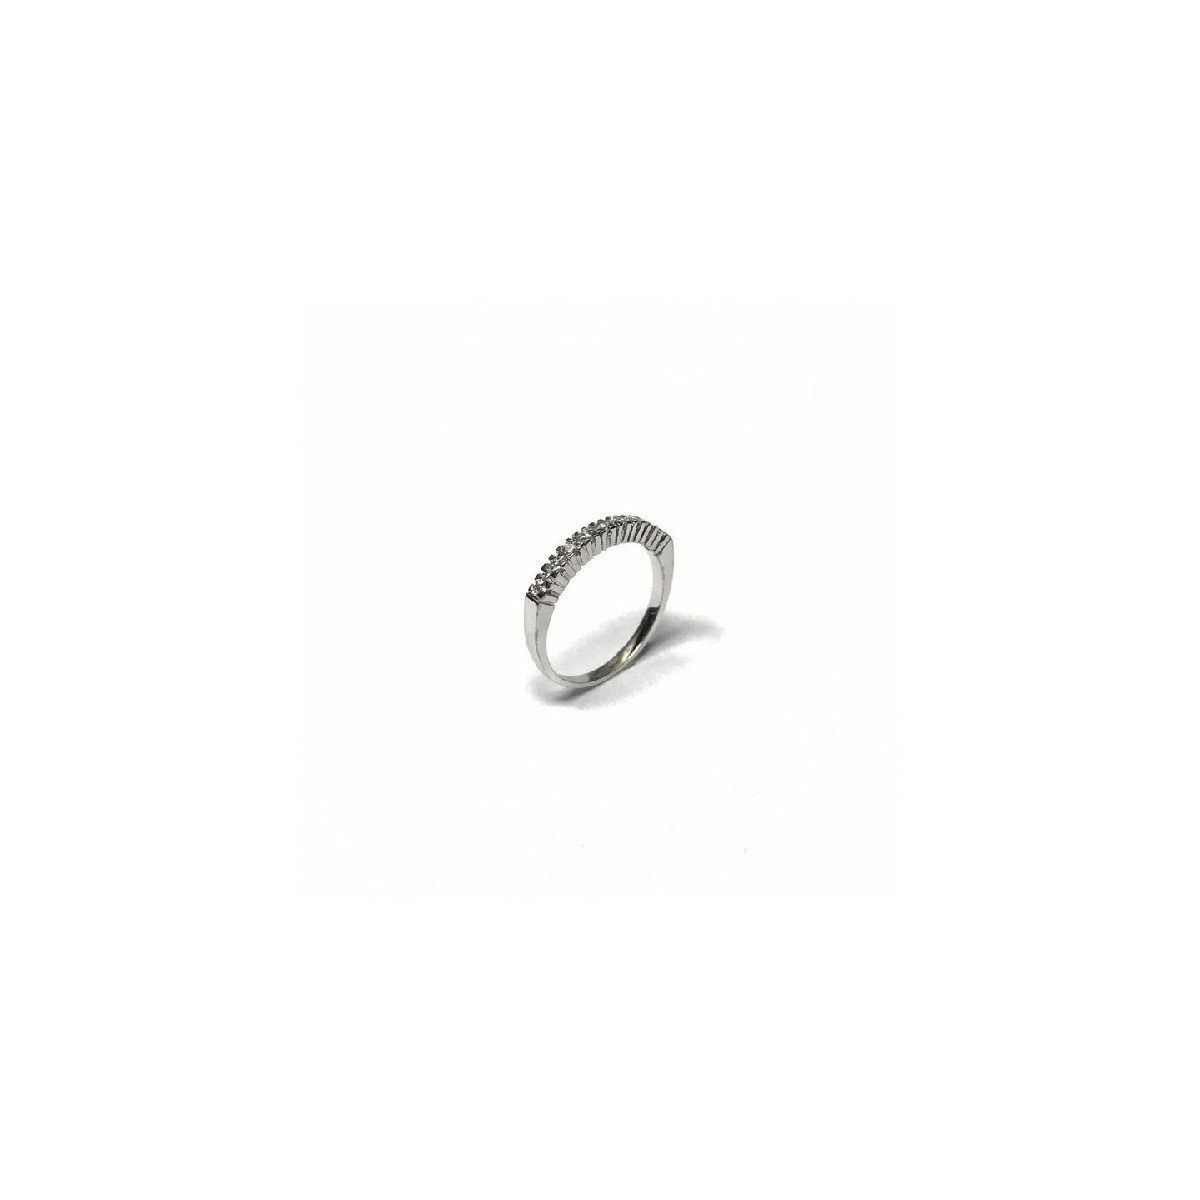 HALF ALLIANCE CLIMENT 1890 RING - S-057-9/BR